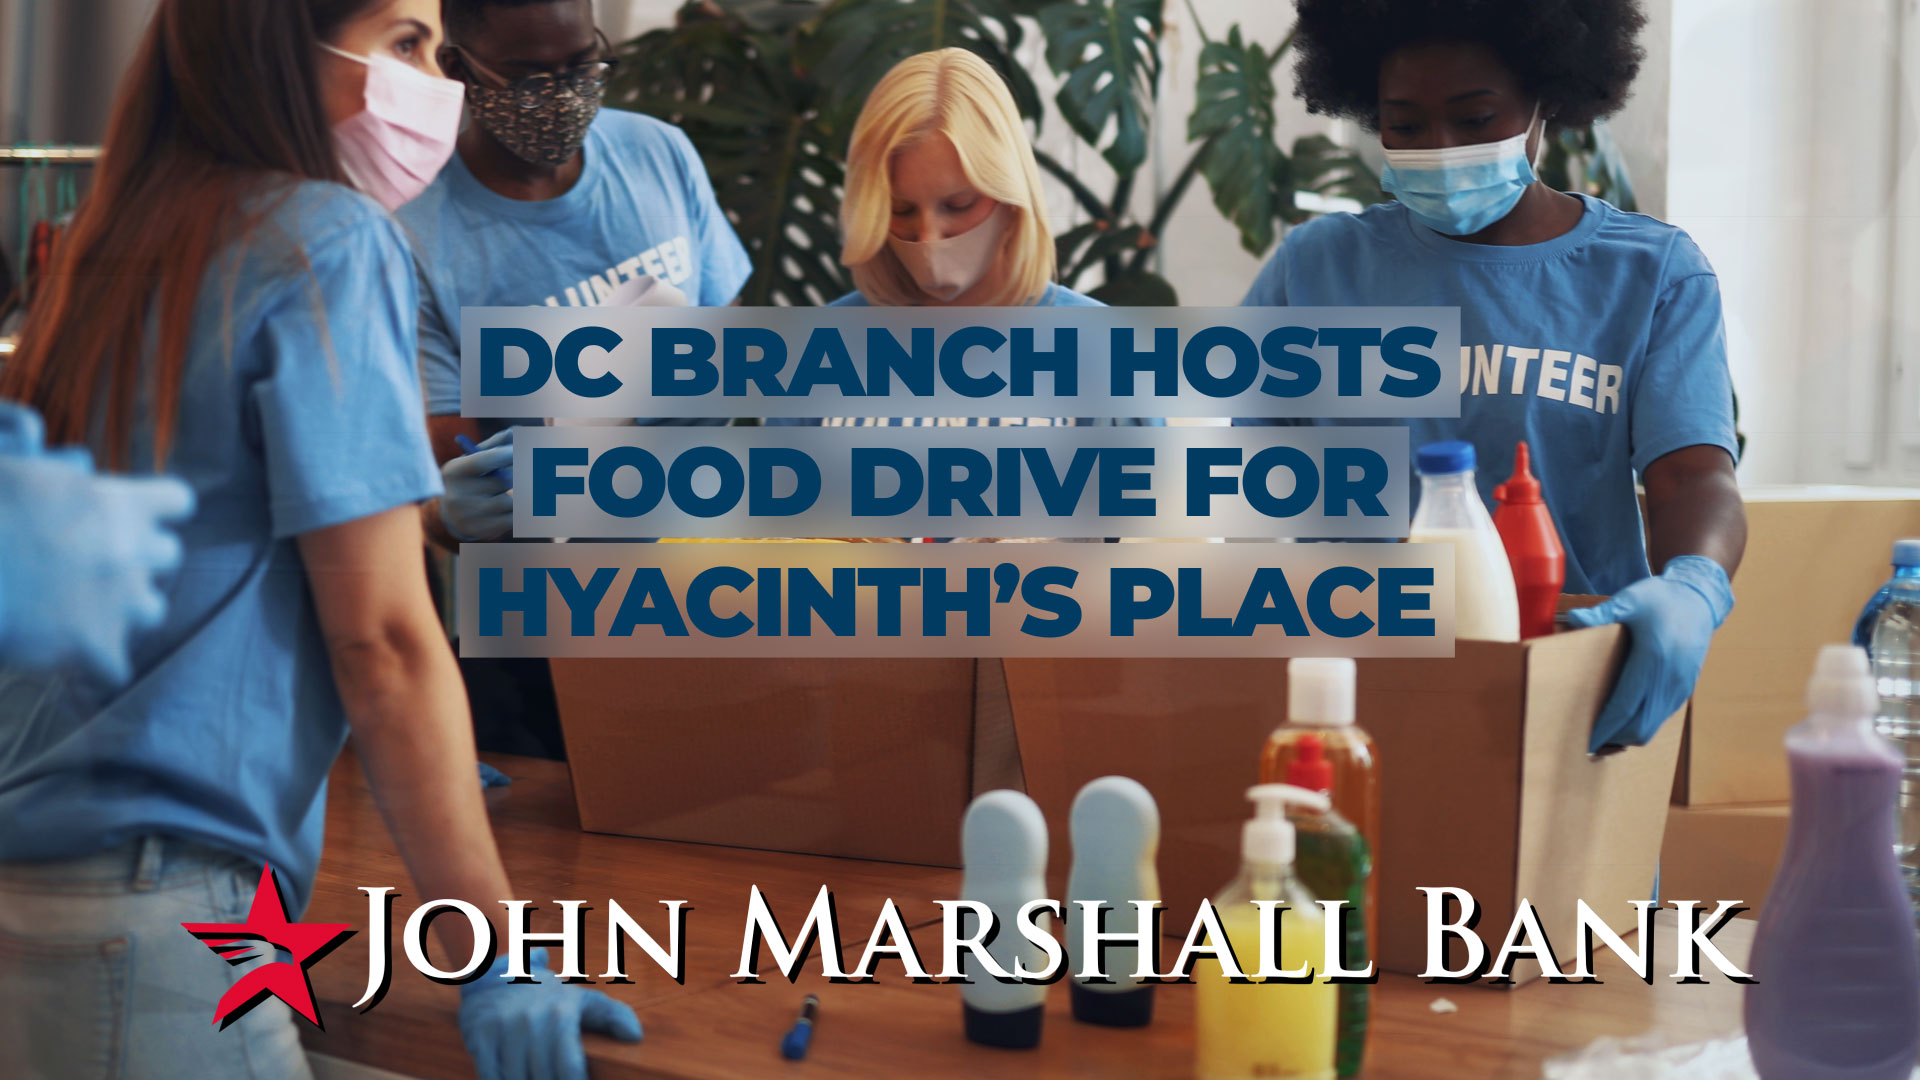 JMB's DC Branch Holds a Food Drive for Hyacinth's Place